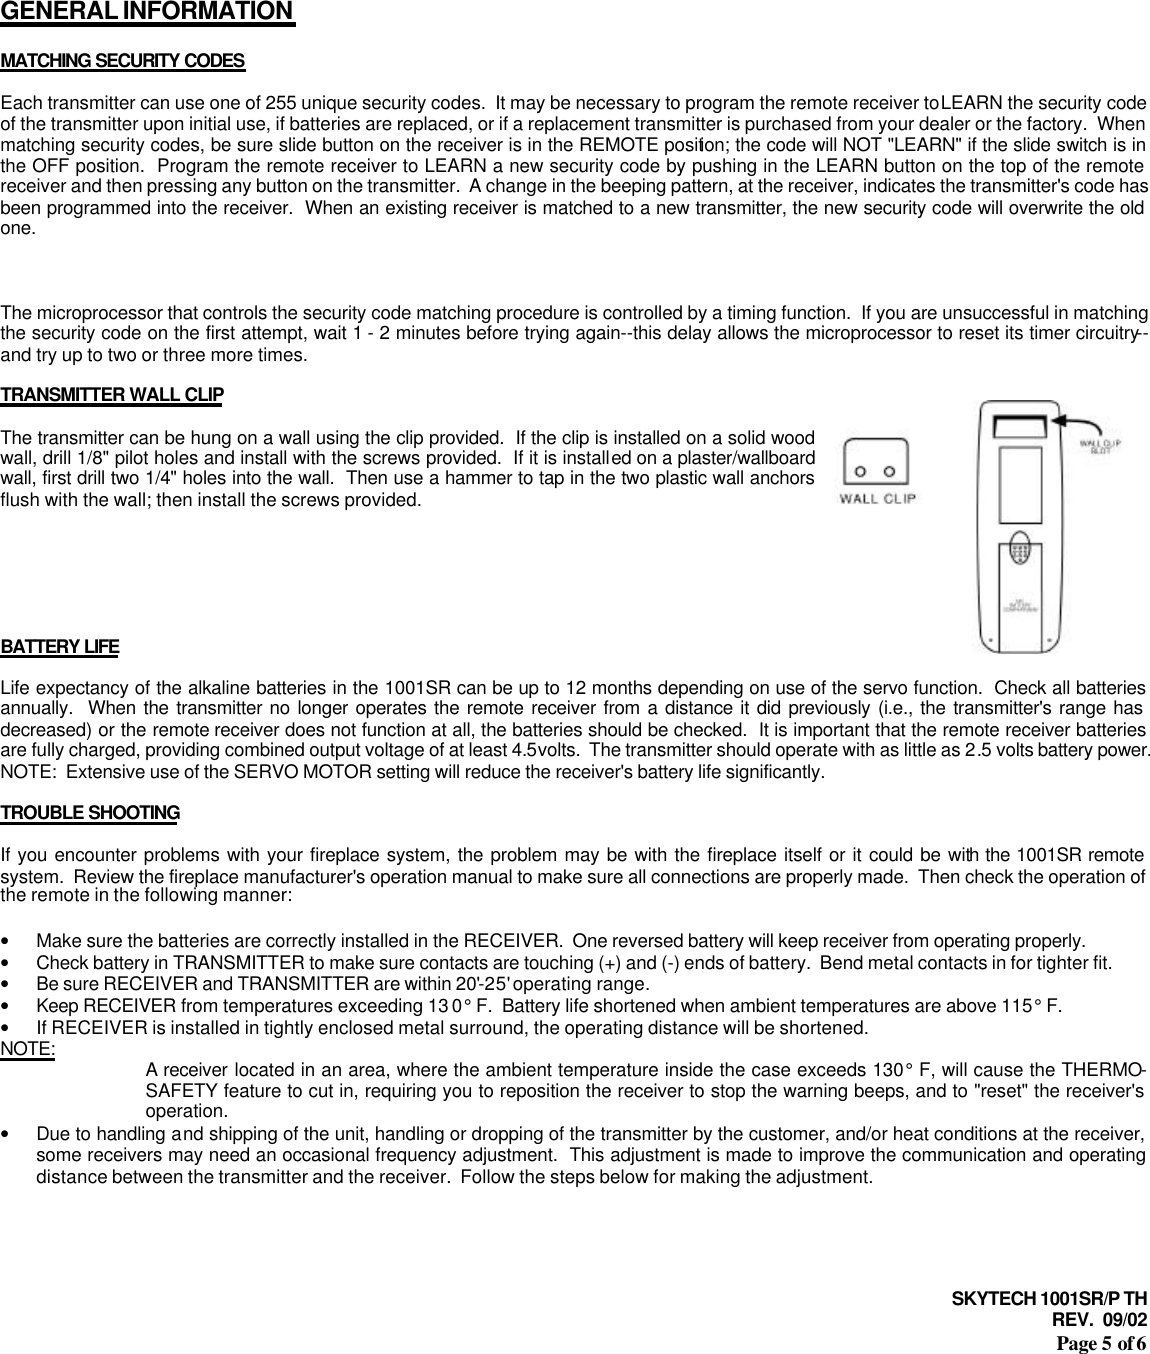 SKYTECH 1001SR/P TH REV.  09/02 Page 5 of 6       GENERAL INFORMATION  MATCHING SECURITY CODES  Each transmitter can use one of 255 unique security codes.  It may be necessary to program the remote receiver to LEARN the security code of the transmitter upon initial use, if batteries are replaced, or if a replacement transmitter is purchased from your dealer or the factory.  When matching security codes, be sure slide button on the receiver is in the REMOTE position; the code will NOT &quot;LEARN&quot; if the slide switch is in the OFF position.  Program the remote receiver to LEARN a new security code by pushing in the LEARN button on the top of the remote receiver and then pressing any button on the transmitter.  A change in the beeping pattern, at the receiver, indicates the transmitter&apos;s code has been programmed into the receiver.  When an existing receiver is matched to a new transmitter, the new security code will overwrite the old one.    The microprocessor that controls the security code matching procedure is controlled by a timing function.  If you are unsuccessful in matching the security code on the first attempt, wait 1 - 2 minutes before trying again--this delay allows the microprocessor to reset its timer circuitry--and try up to two or three more times.  TRANSMITTER WALL CLIP  The transmitter can be hung on a wall using the clip provided.  If the clip is installed on a solid wood wall, drill 1/8&quot; pilot holes and install with the screws provided.  If it is installed on a plaster/wallboard wall, first drill two 1/4&quot; holes into the wall.  Then use a hammer to tap in the two plastic wall anchors flush with the wall; then install the screws provided.       BATTERY LIFE  Life expectancy of the alkaline batteries in the 1001SR can be up to 12 months depending on use of the servo function.  Check all batteries annually.  When the transmitter no longer operates the remote receiver from a distance it did previously (i.e., the transmitter&apos;s range has decreased) or the remote receiver does not function at all, the batteries should be checked.  It is important that the remote receiver batteries are fully charged, providing combined output voltage of at least 4.5volts.  The transmitter should operate with as little as 2.5 volts battery power.  NOTE:  Extensive use of the SERVO MOTOR setting will reduce the receiver&apos;s battery life significantly.  TROUBLE SHOOTING  If you encounter problems with your fireplace system, the problem may be with the fireplace itself or it could be with the 1001SR remote system.  Review the fireplace manufacturer&apos;s operation manual to make sure all connections are properly made.  Then check the operation of the remote in the following manner:  • Make sure the batteries are correctly installed in the RECEIVER.  One reversed battery will keep receiver from operating properly.  • Check battery in TRANSMITTER to make sure contacts are touching (+) and (-) ends of battery.  Bend metal contacts in for tighter fit. • Be sure RECEIVER and TRANSMITTER are within 20&apos;-25&apos; operating range. • Keep RECEIVER from temperatures exceeding 13 0° F.  Battery life shortened when ambient temperatures are above 115° F. • If RECEIVER is installed in tightly enclosed metal surround, the operating distance will be shortened. NOTE: A receiver located in an area, where the ambient temperature inside the case exceeds 130° F, will cause the THERMO-SAFETY feature to cut in, requiring you to reposition the receiver to stop the warning beeps, and to &quot;reset&quot; the receiver&apos;s operation. • Due to handling and shipping of the unit, handling or dropping of the transmitter by the customer, and/or heat conditions at the receiver, some receivers may need an occasional frequency adjustment.  This adjustment is made to improve the communication and operating distance between the transmitter and the receiver.  Follow the steps below for making the adjustment.    